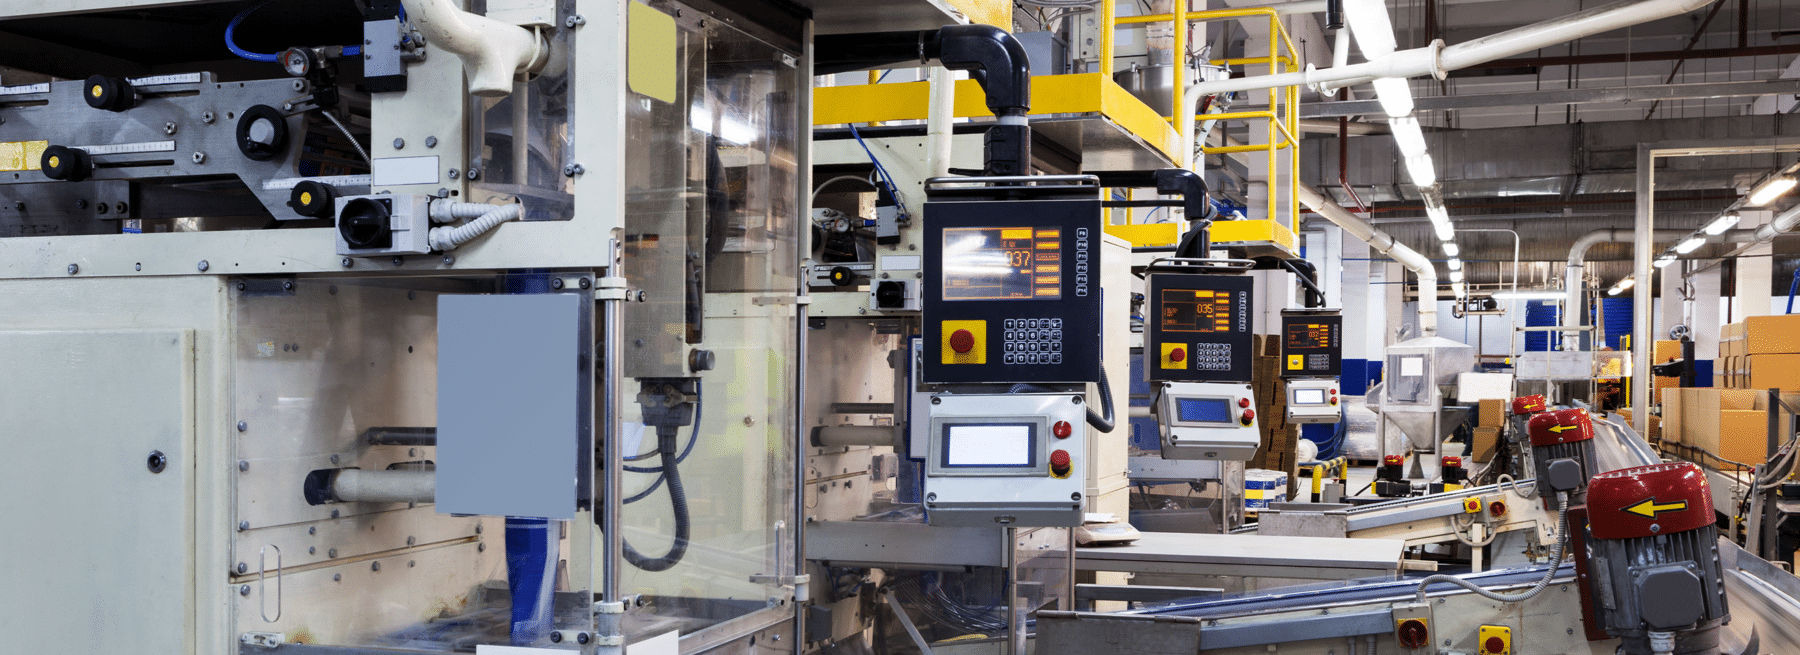 Defending Manufacturing Facilities from Security Threats